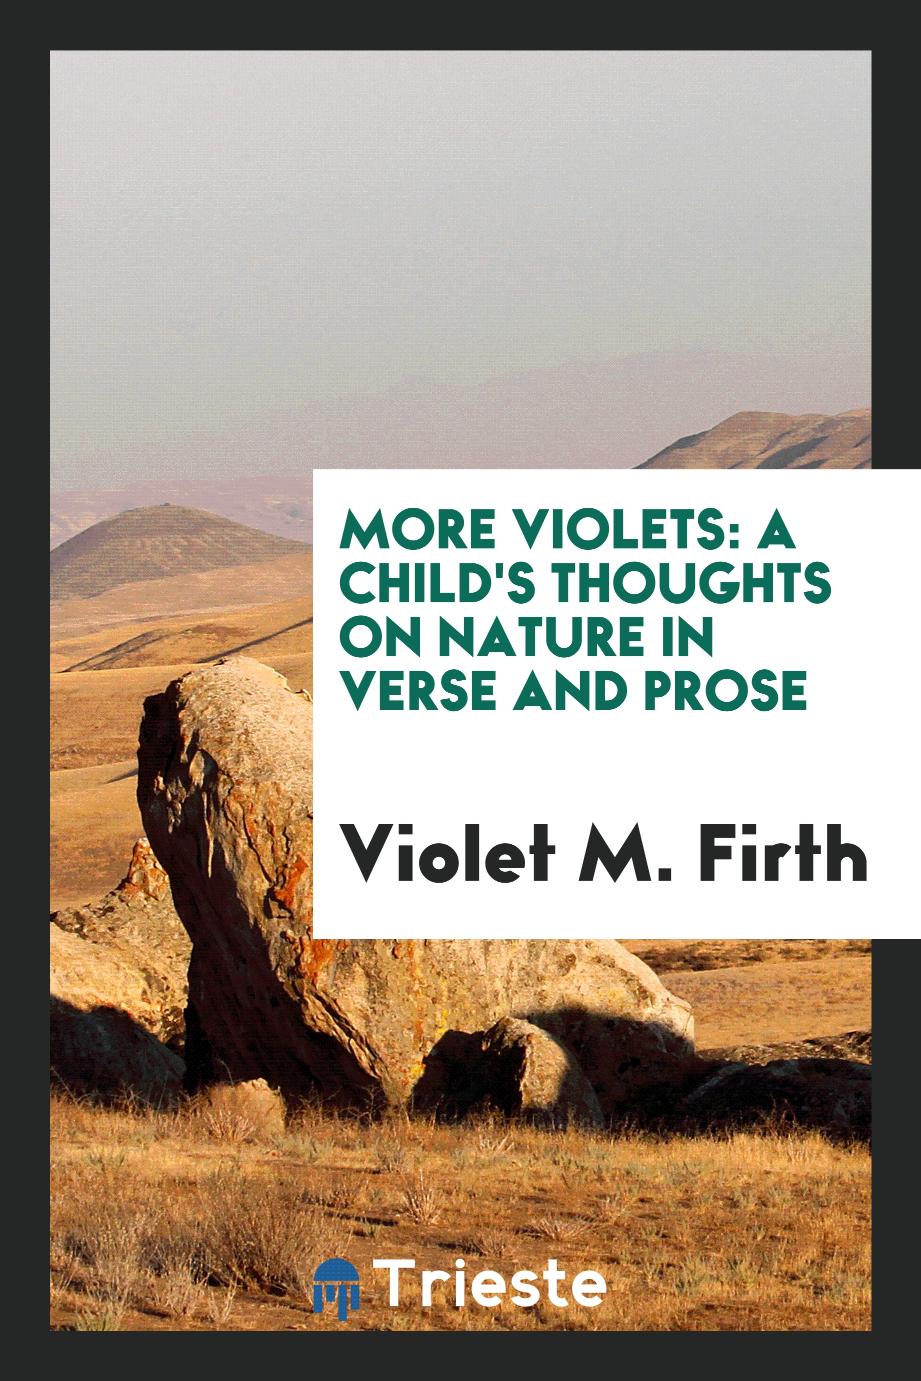 More violets: a child's thoughts on nature in verse and prose